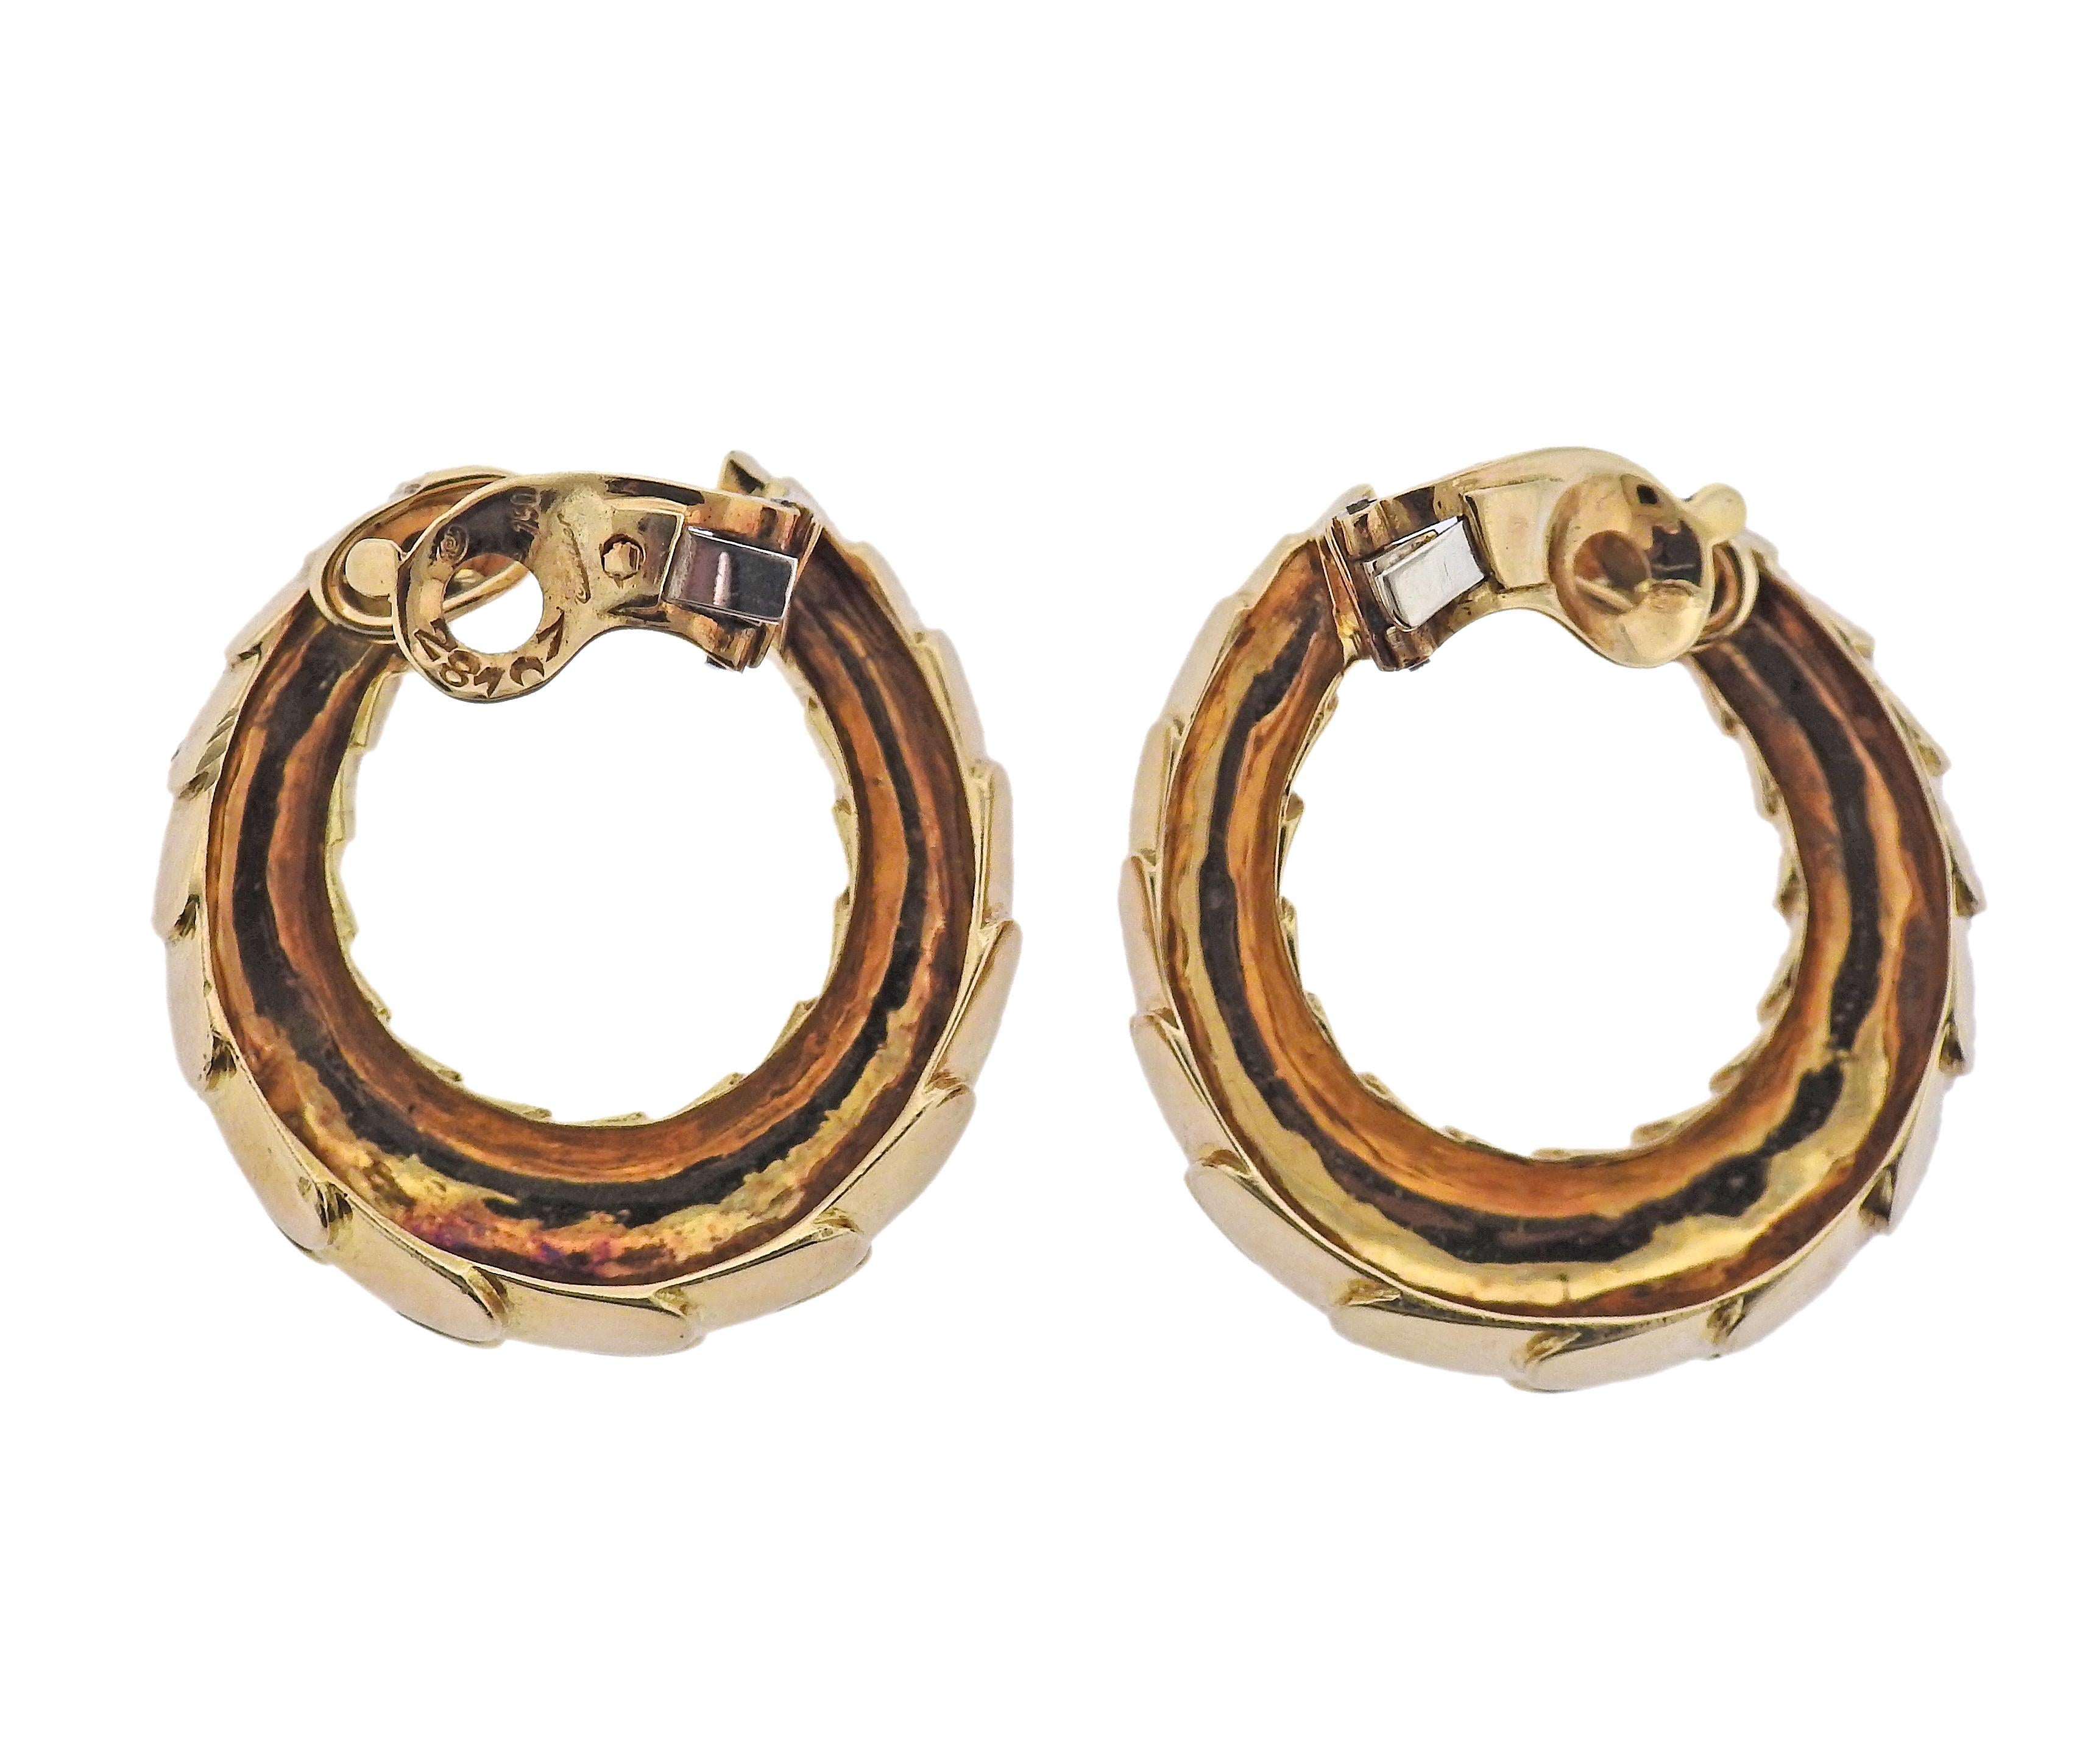 Pair of large 18k gold snake skin design hoop earrings by Cartier. Earrings measure 35mm x 32mm. Marked: Cartier, 750, French mark. Weight - 37.5 grams.